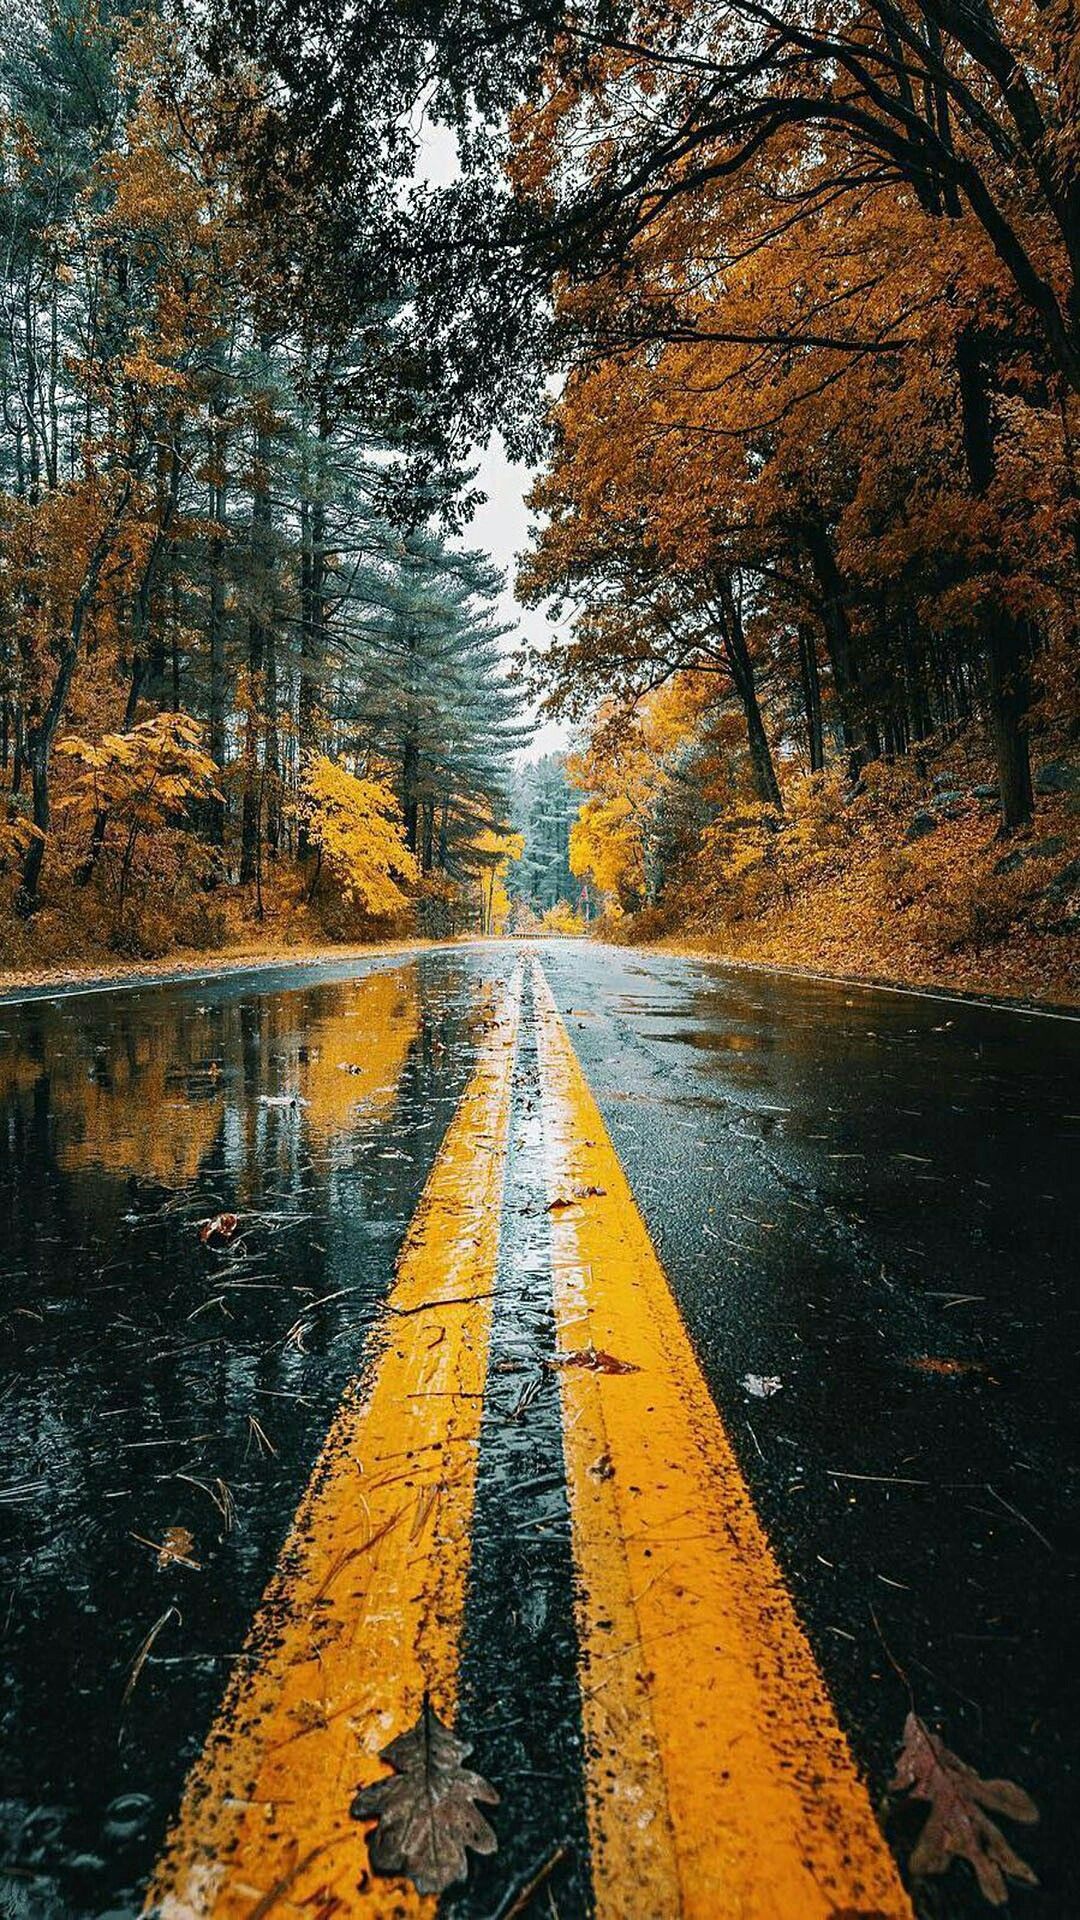 Android Wet Rainy Road Reflection Wallpapers - Wallpaper Cave